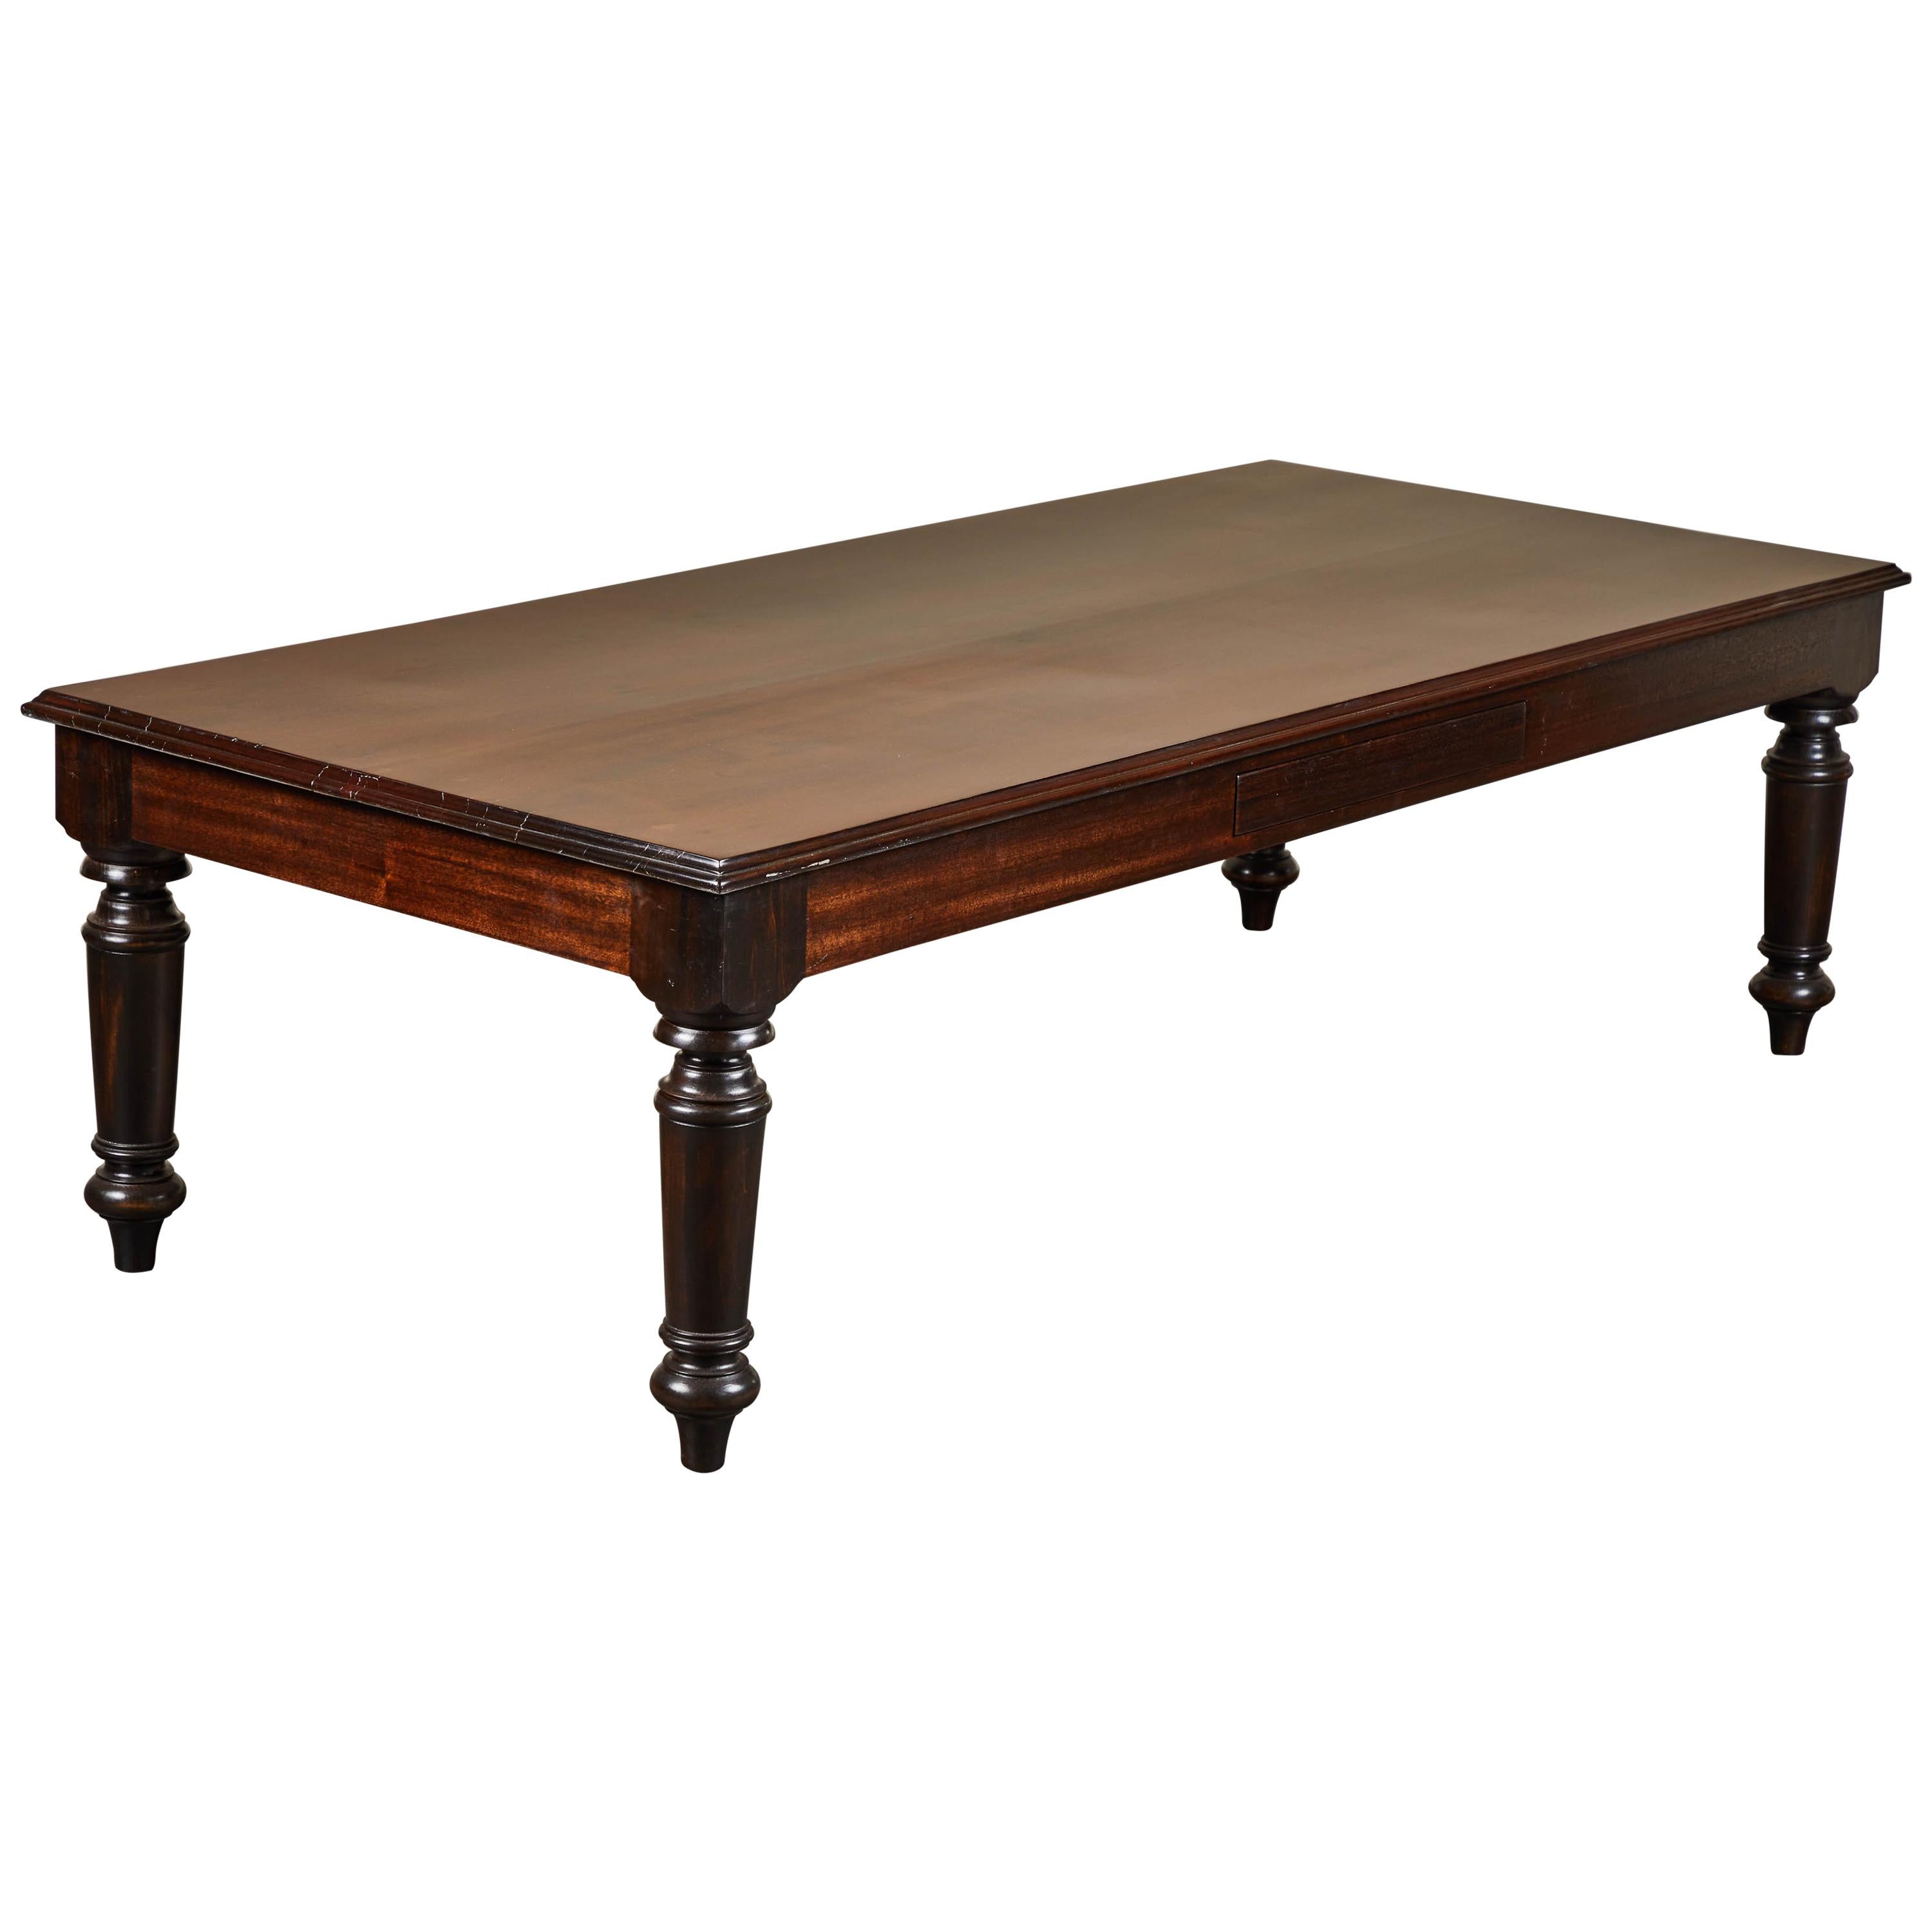 19th Century British Colonial Rosewood Coffee Table with Newer Legs